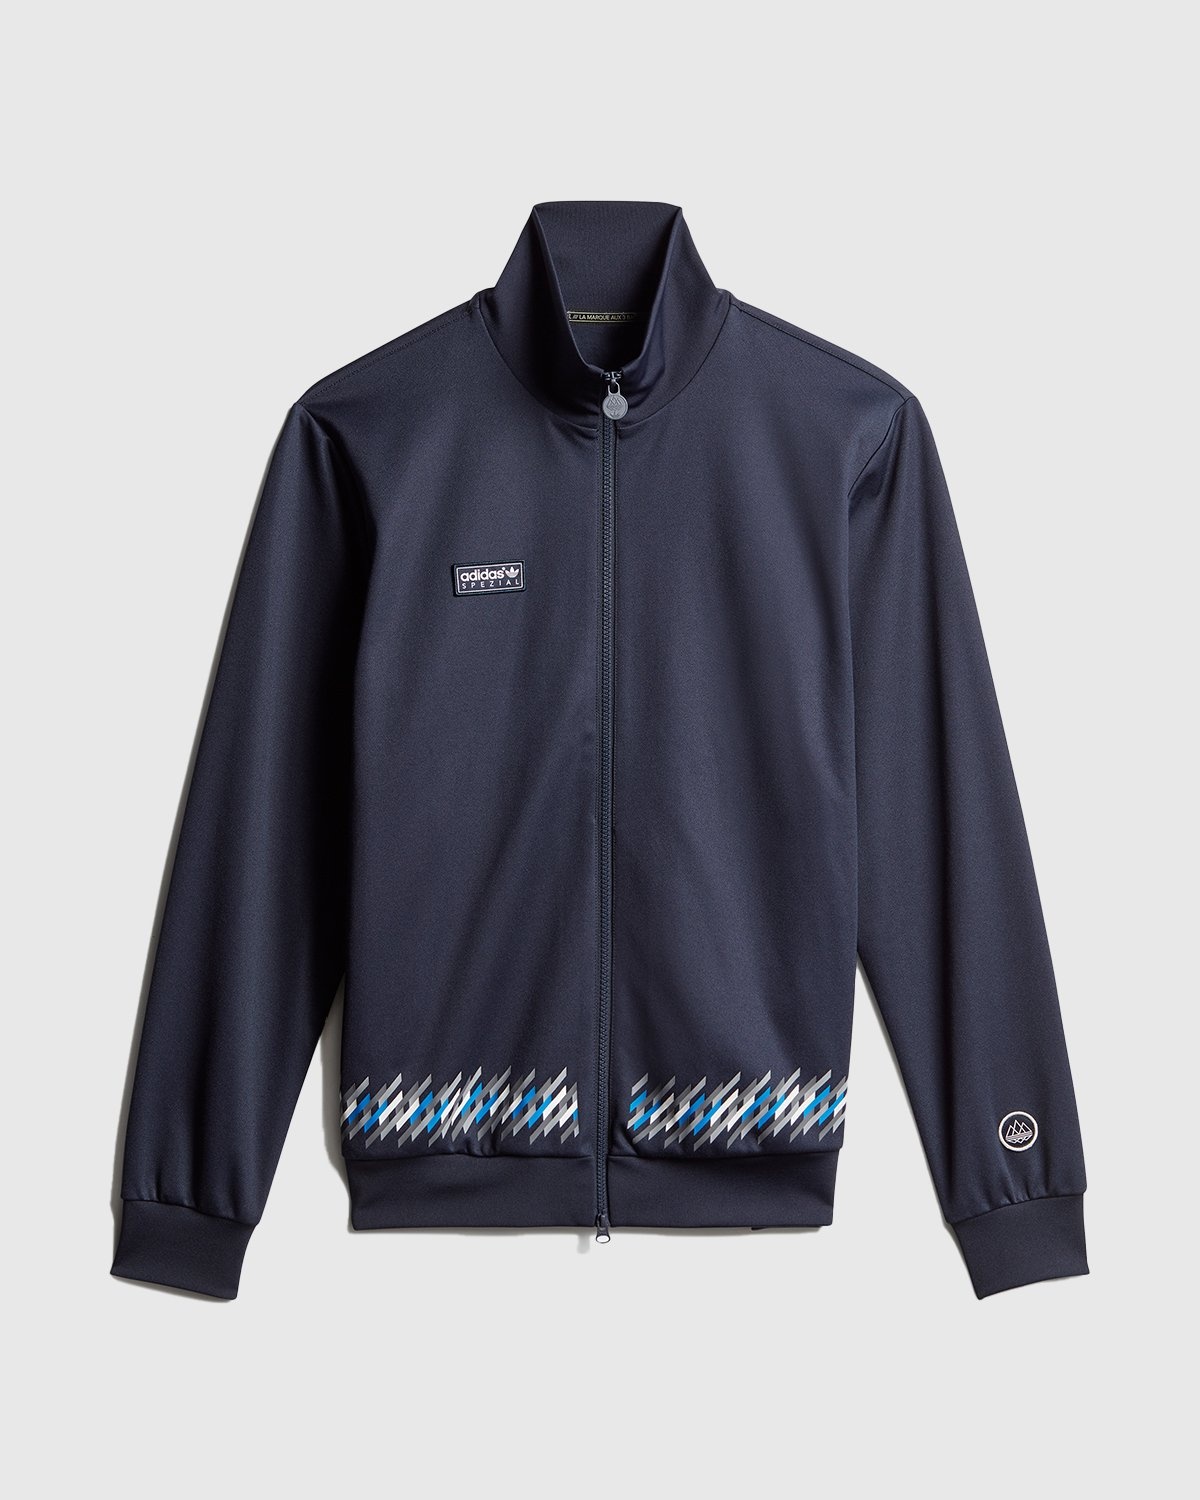 Adidas – Track Top Spezial x New Order Navy - Track Jackets - Blue - Image 1